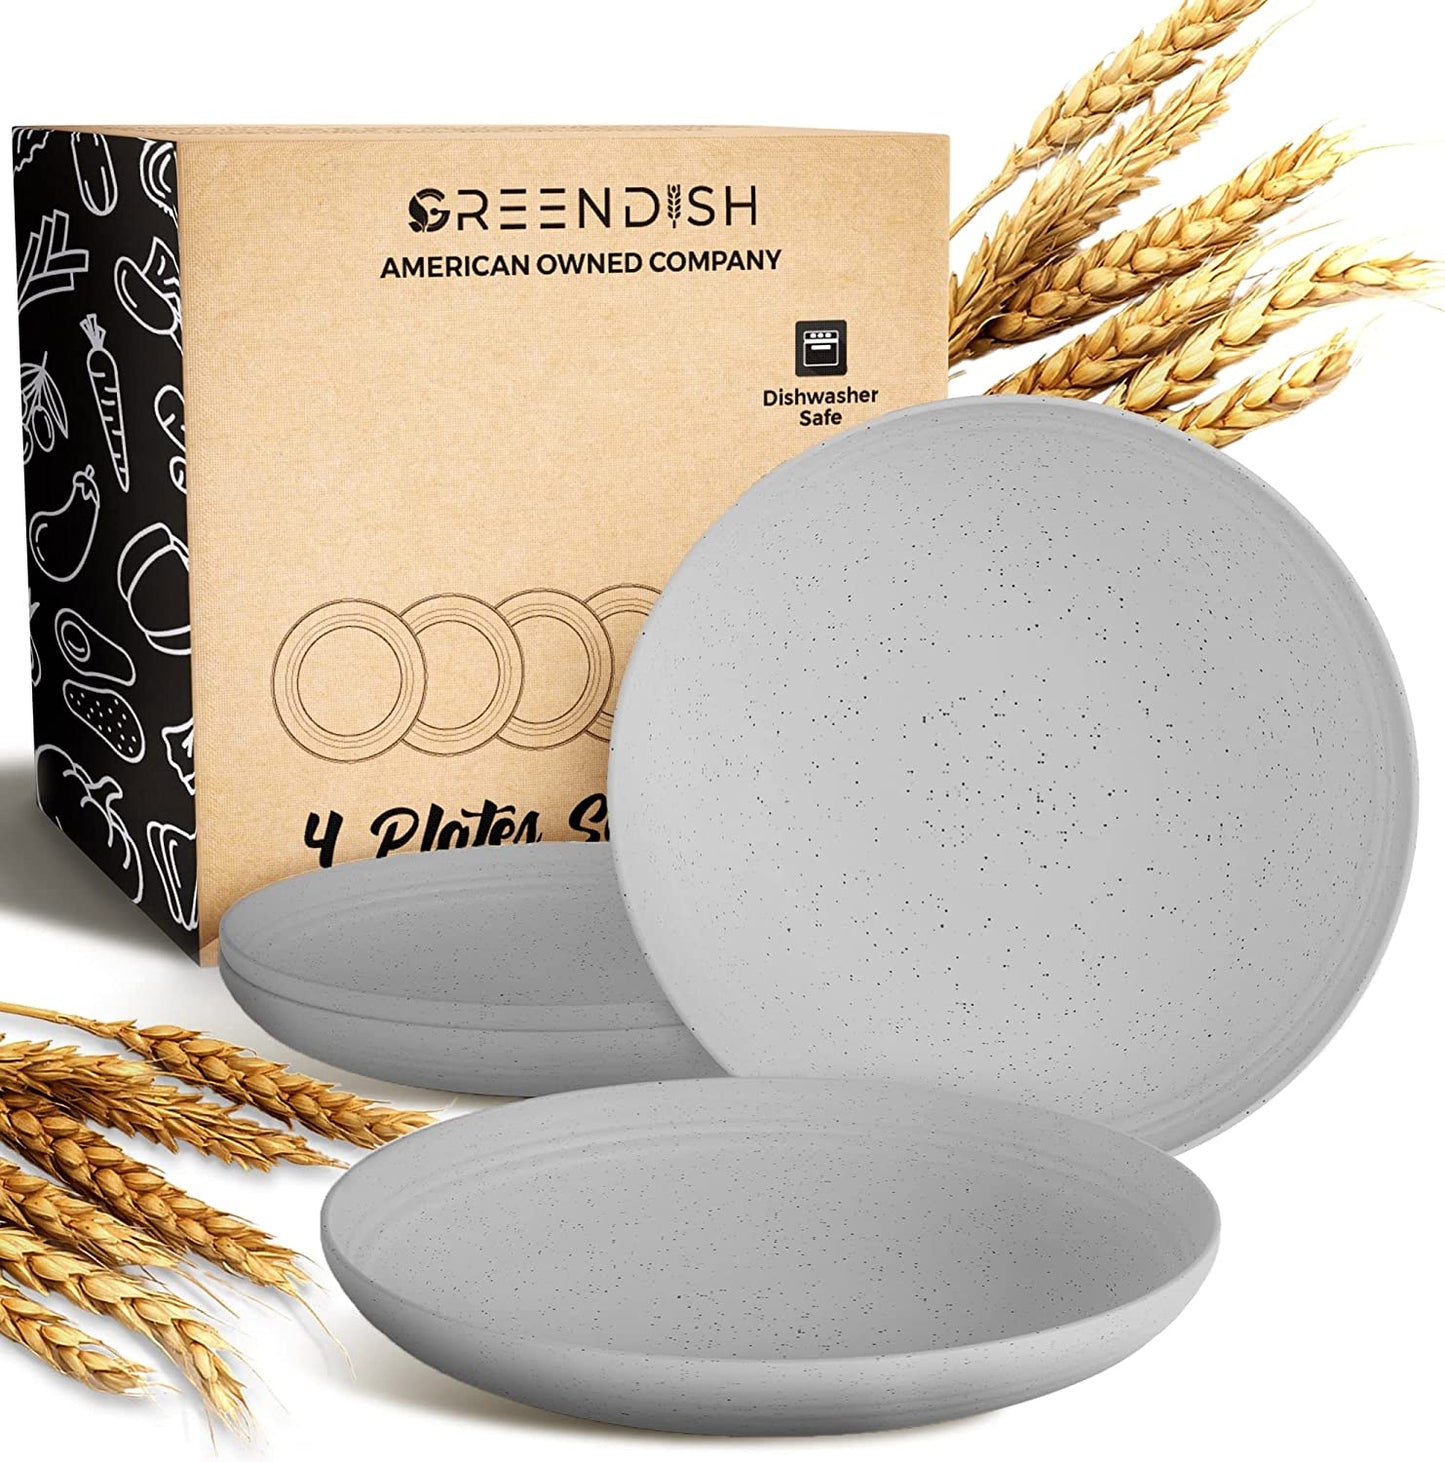 New Set of 4 Wheat Straw Plates - Reusable Unbreakable Wheatstraw Plastic Dishes Dinner Plates - Deep Plates with Lip Edge, Microwave & Dishwasher Safe Microwavable Wheat Plates, Camping Plates Set